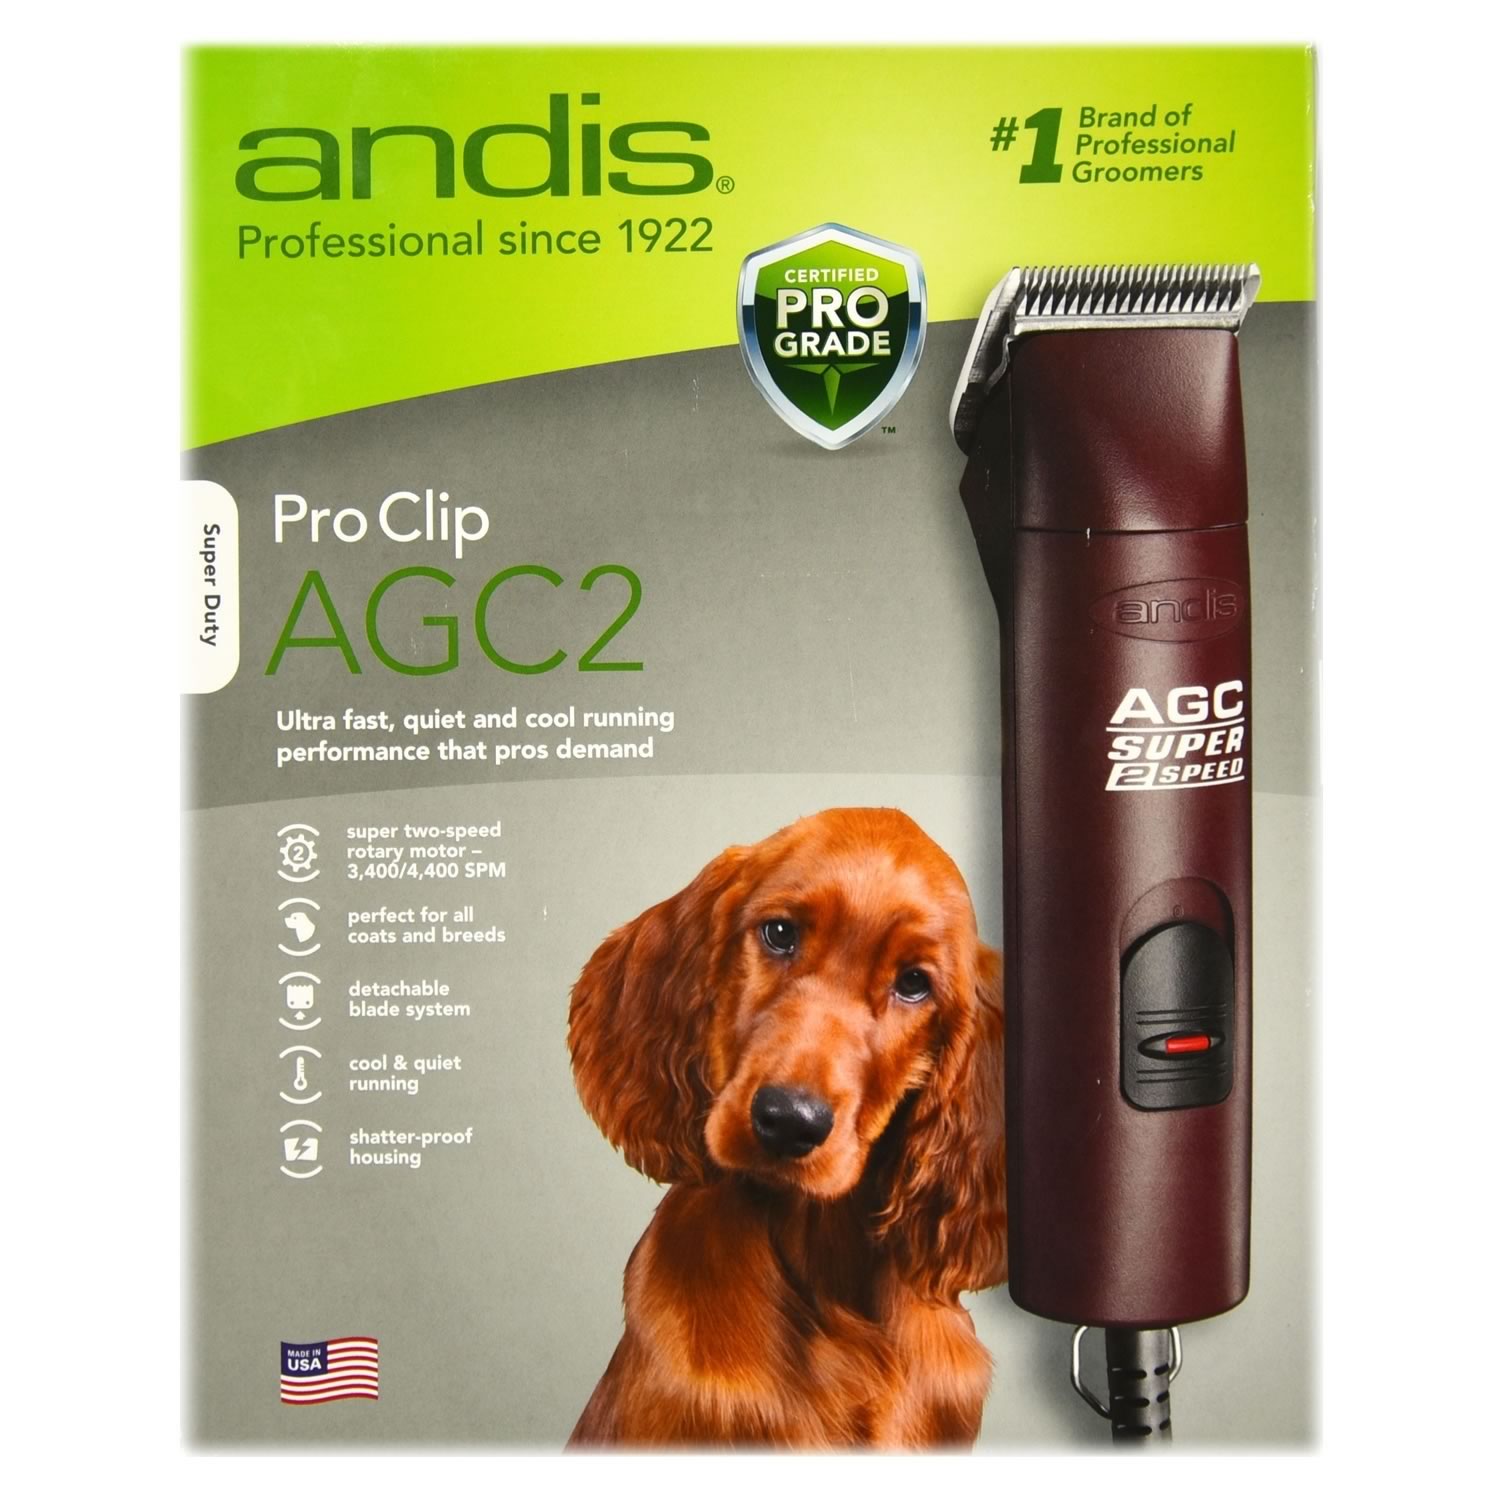 AGC2 Professional Animal/Dog Grooming Andis UltraEdge Super 2-Speed Detachable Blade Clipper 